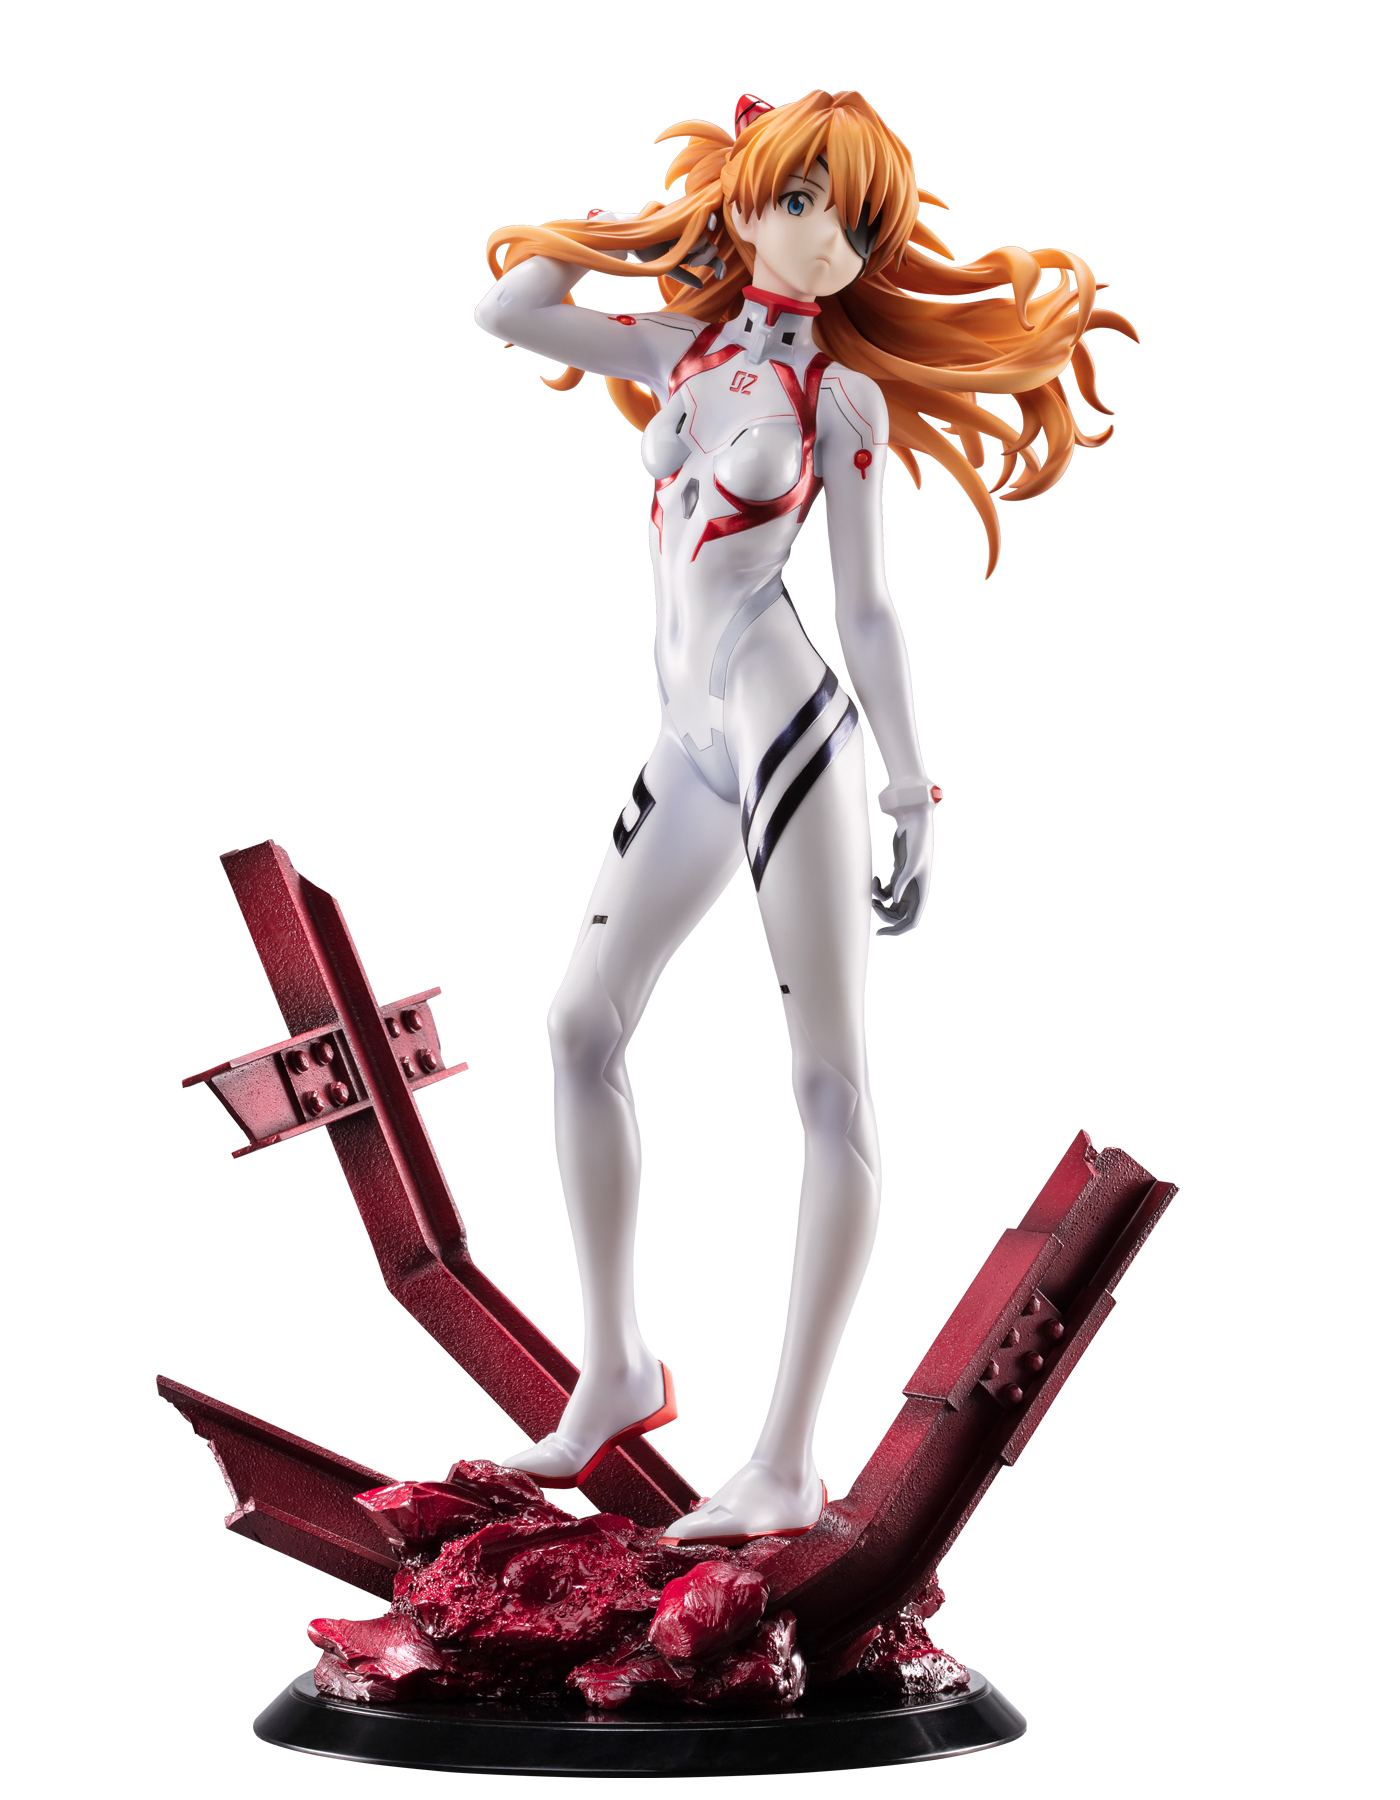 Evangelion 3.0+1.0 Thrice Upon a Time 1/7 Scale Pre-Painted Figure: Asuka Shikinami Langley (Last Mission) Revolve